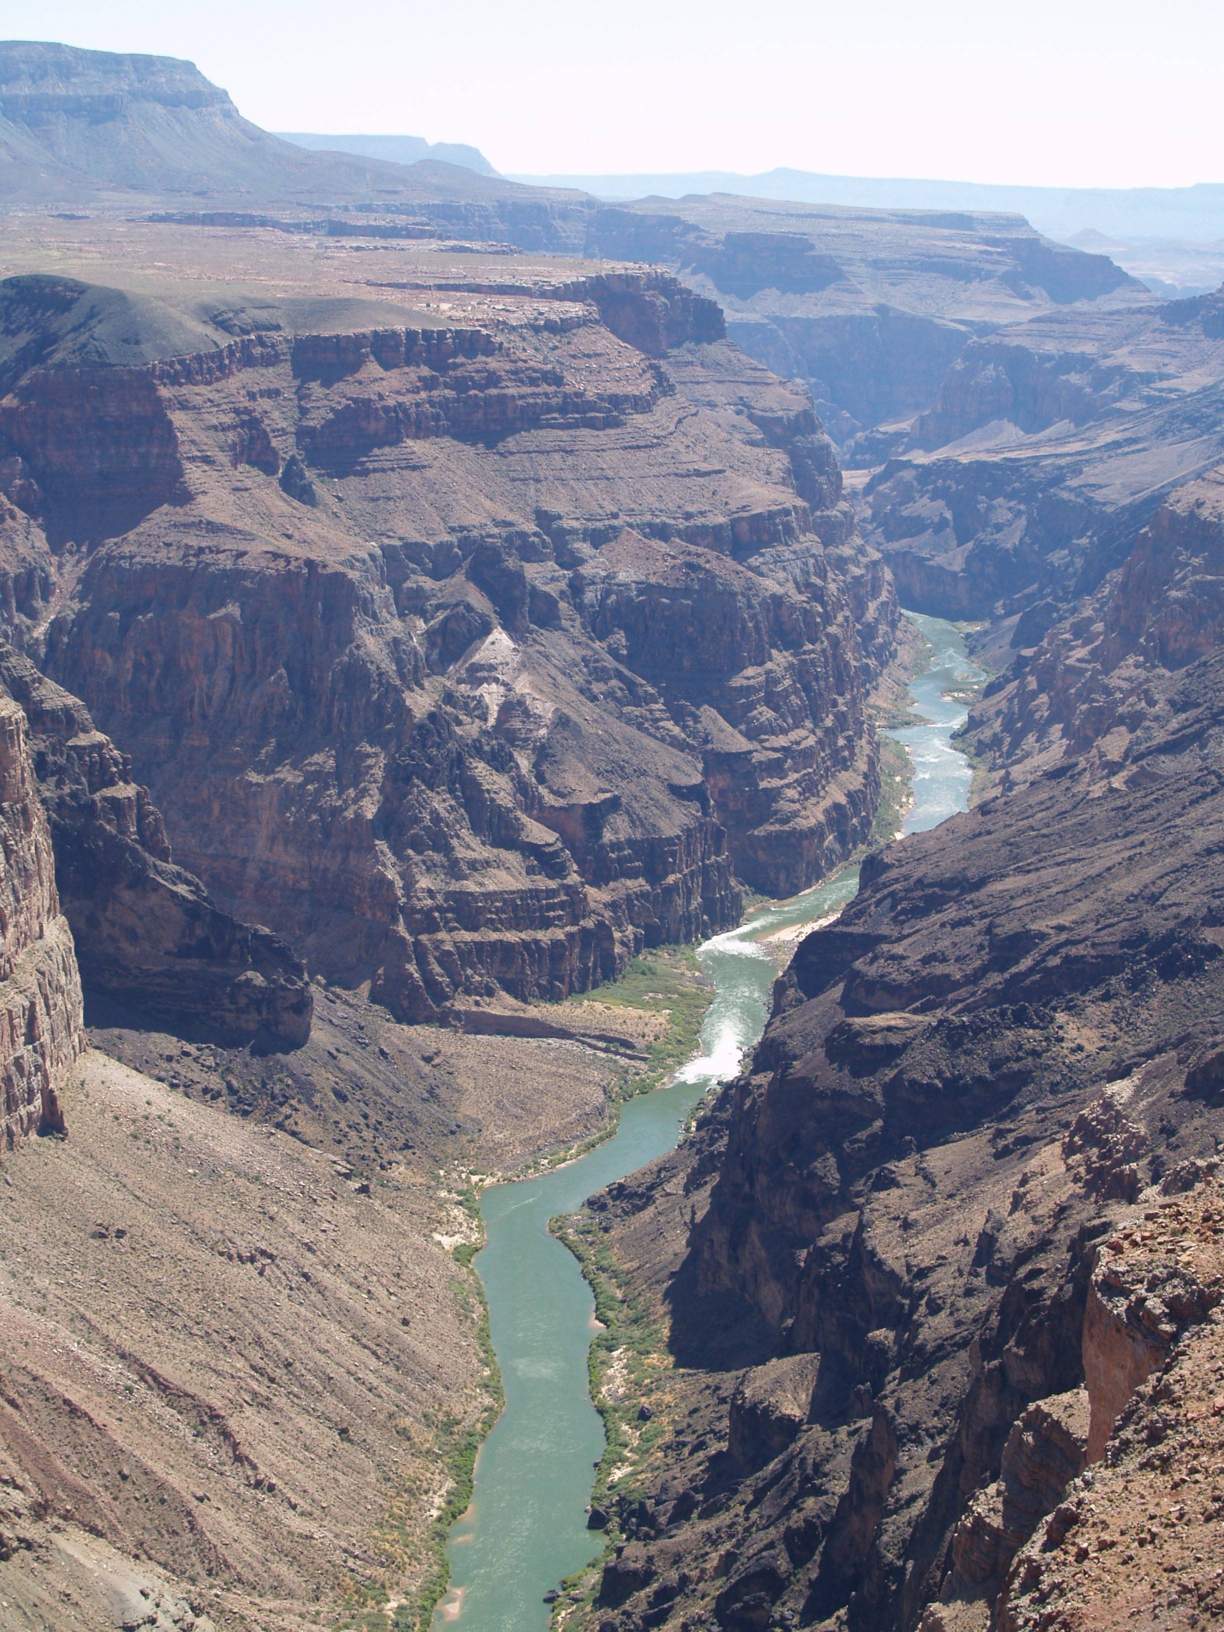 Arial view of a canyon in the Gray Mountains with a river at the bottom of the canyon.